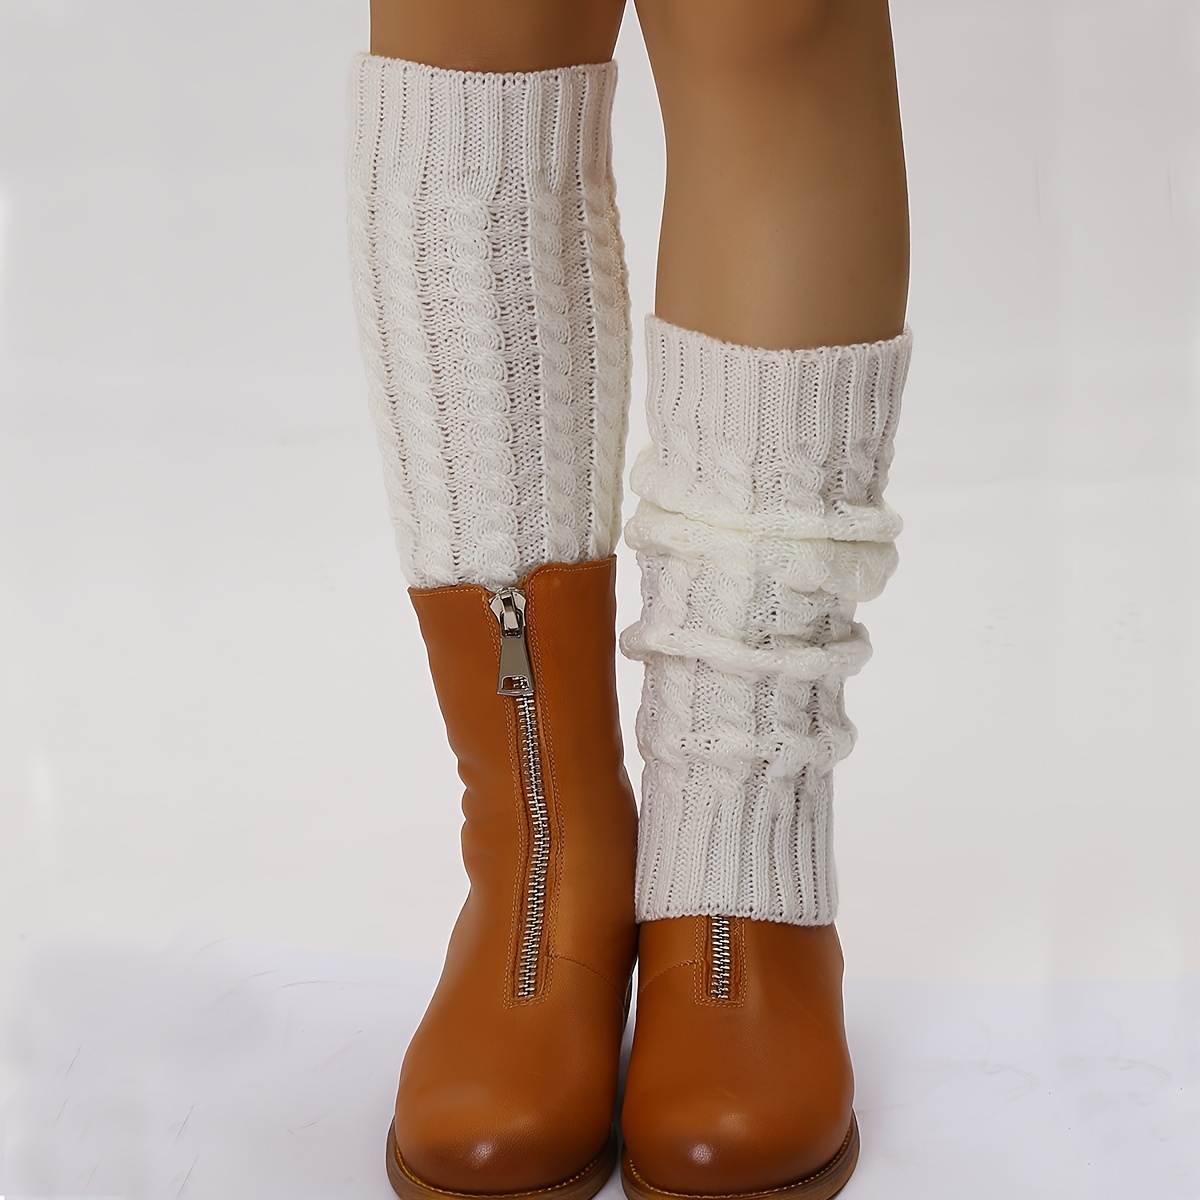 Shoe Parts Accessories Crochet Leg Warmers Women Winter Outdoor Elastic  Boot Cuffs Lady Soft Short Knitted Toppers Boot Socks Ankle Protection  231218 From Ning03, $8.58